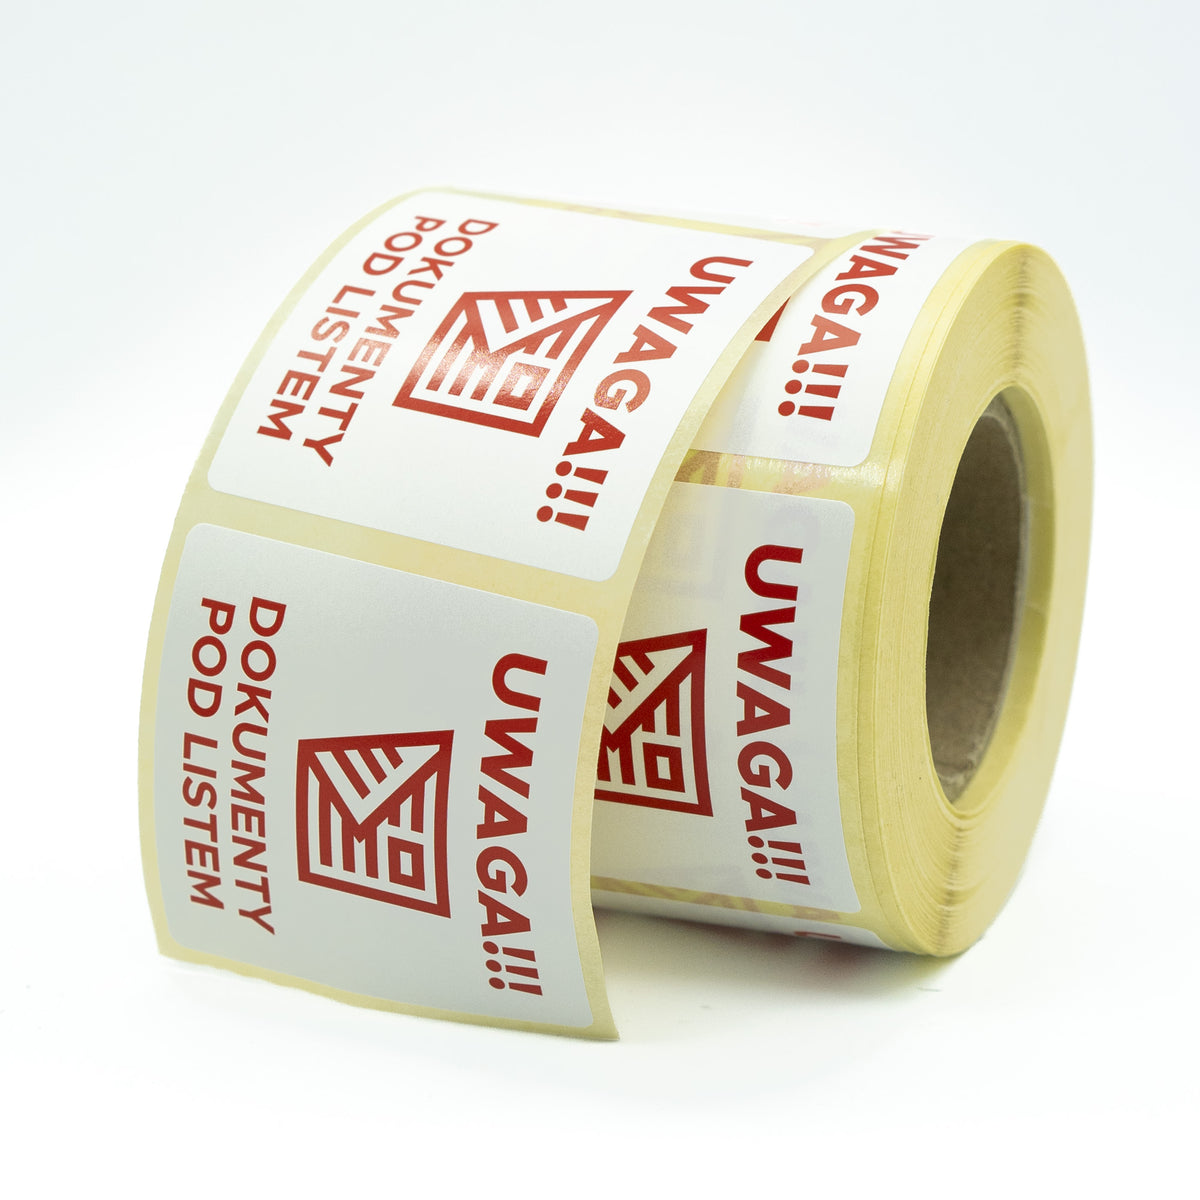 Self-adhesive warning labels- documents under the consignment note 50x50mm 500 per roll